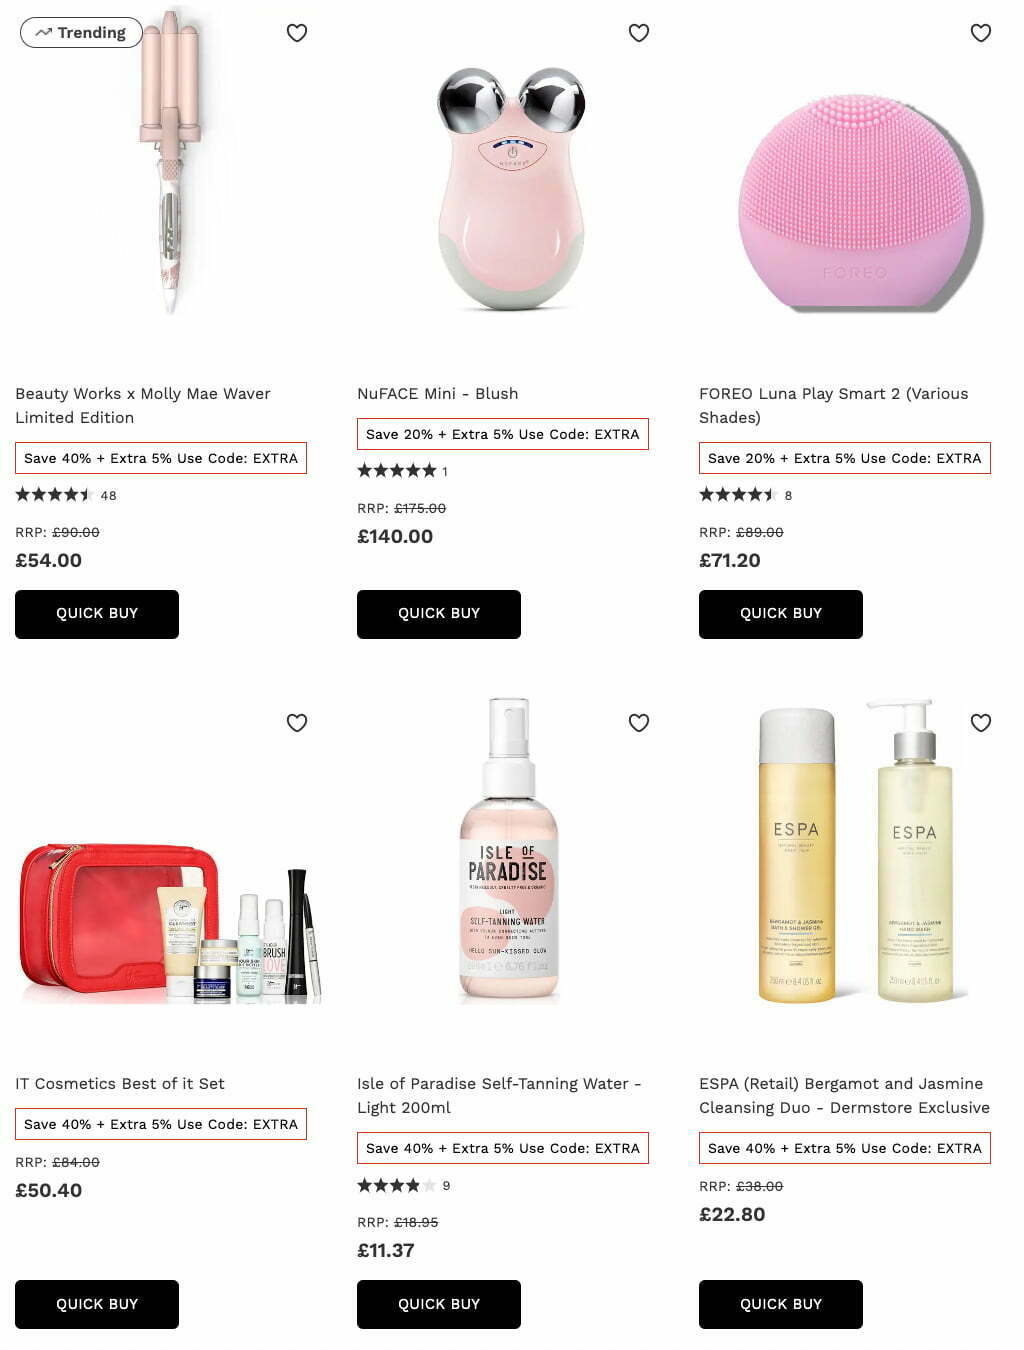 Up to 40% off selected products at Lookfantastic